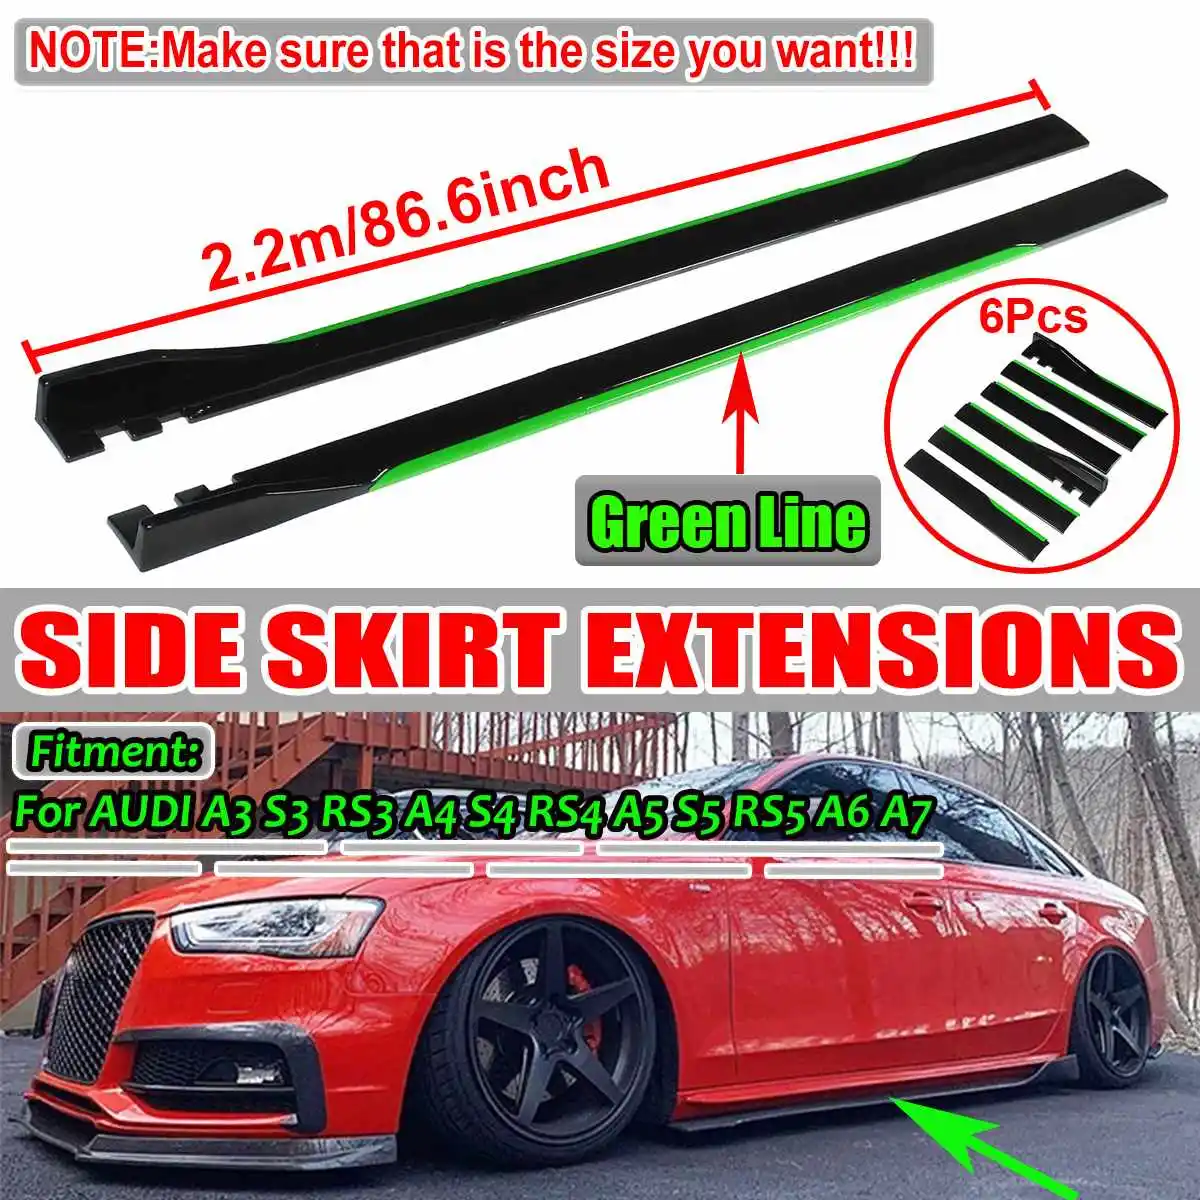 

A3 2.2m Car Side Skirt Extensions Side Skirts Winglet Splitters Lip For AUDI A3 A4 A5 A6 A7 A7 A8 Q3 Q5 Q7 RS5 RS6 RS7 S3 S4 TT